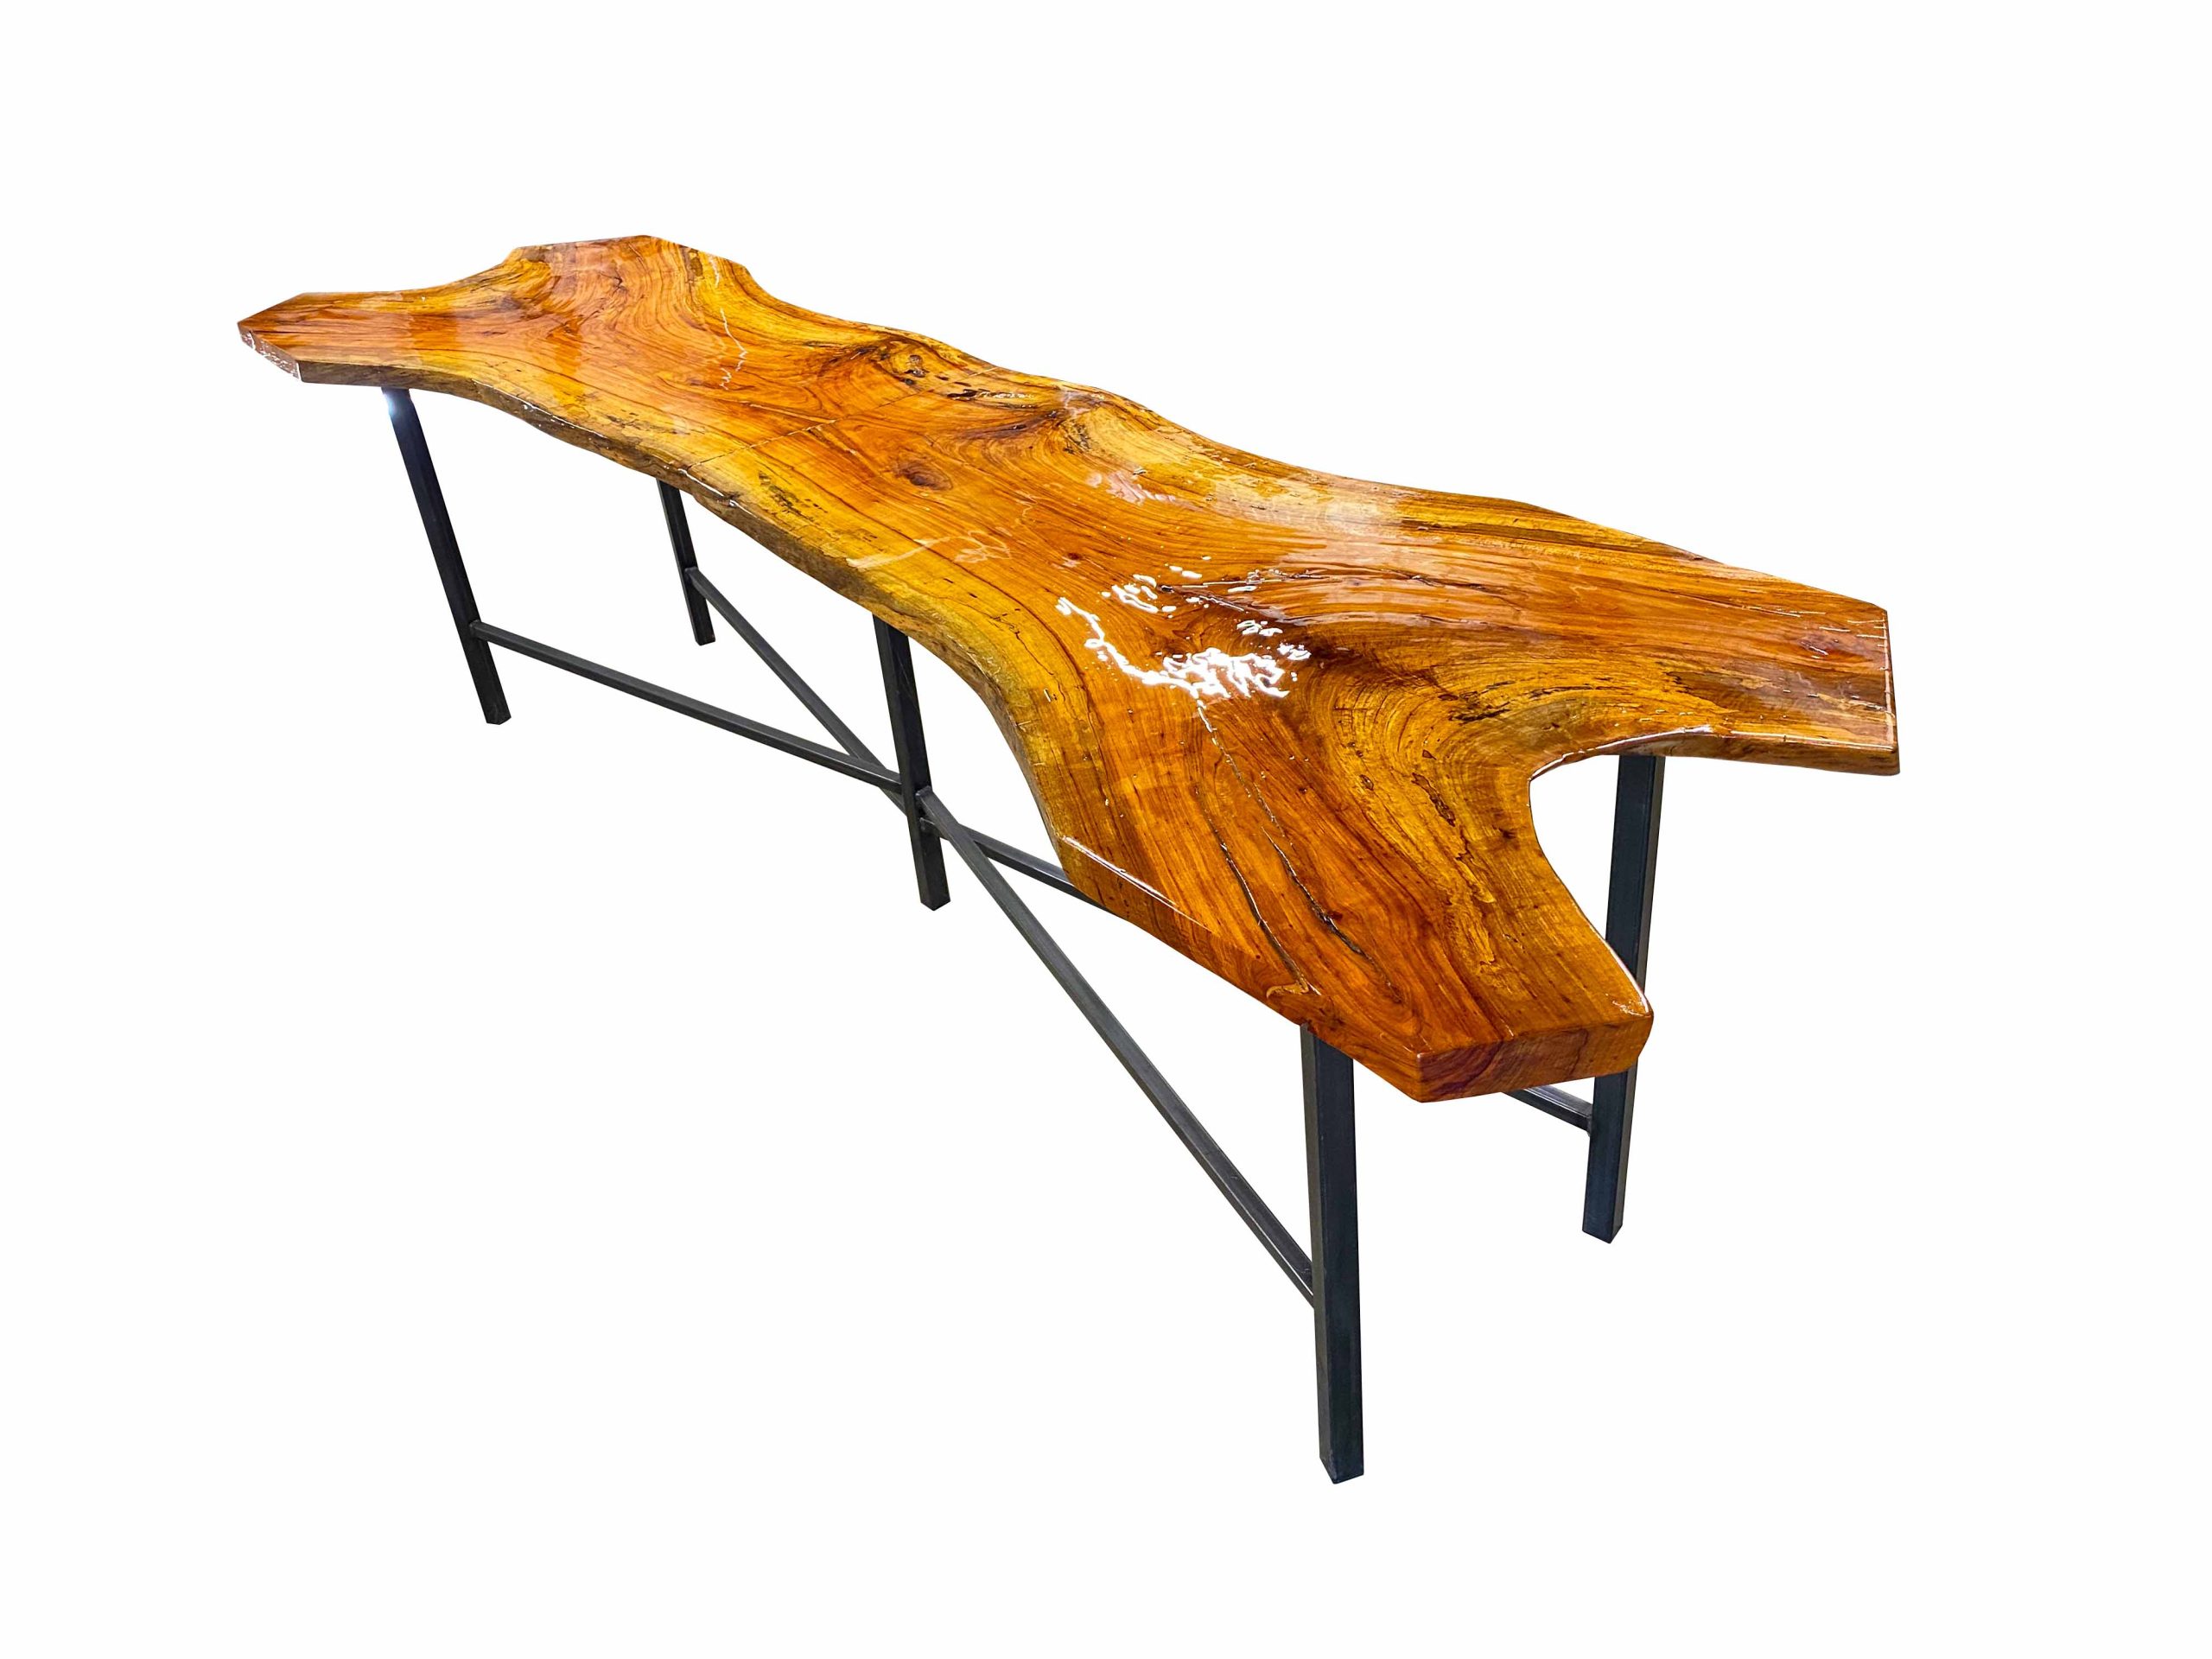 Spalted Pecan Presentation Table